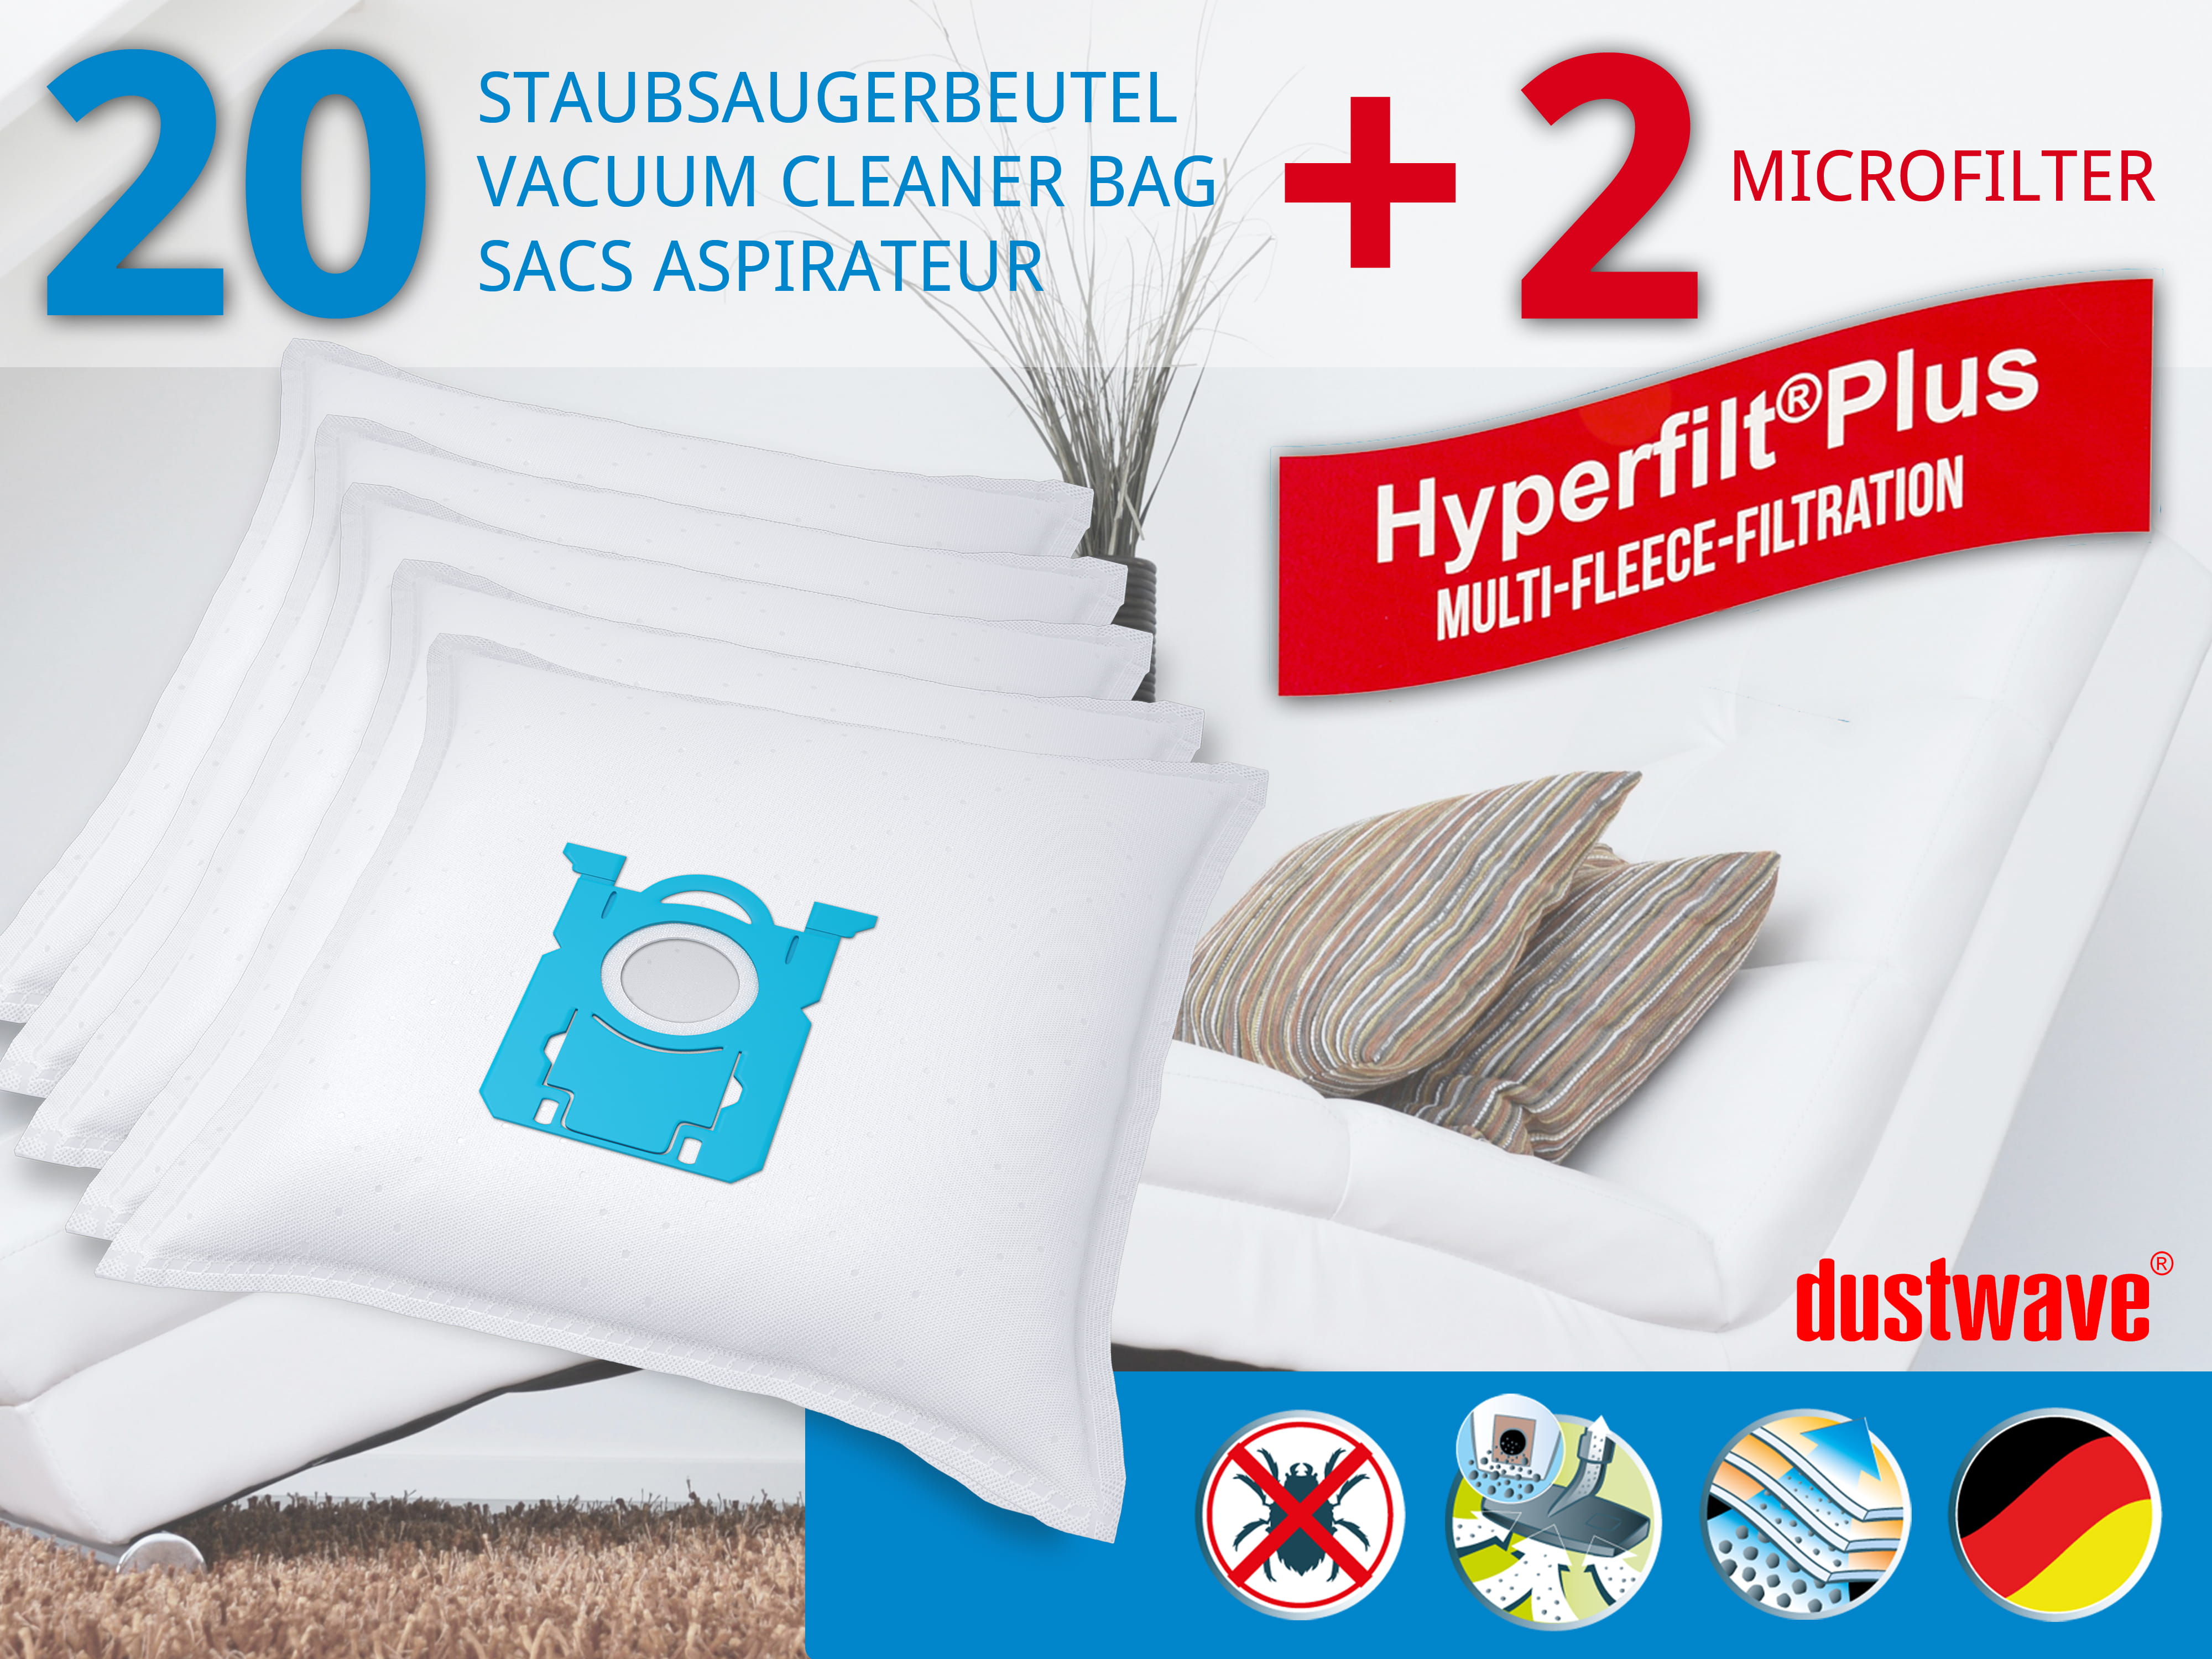 80x dustwave® Staubsaugerbeutel passend für Universal S-Bag Philips Performer. Performer Pro. Active. Compact. Expert FC8729 FC9150 FC9179 FC9180 FC9199 FC8520 FC8529 - Made in Germany + Filter